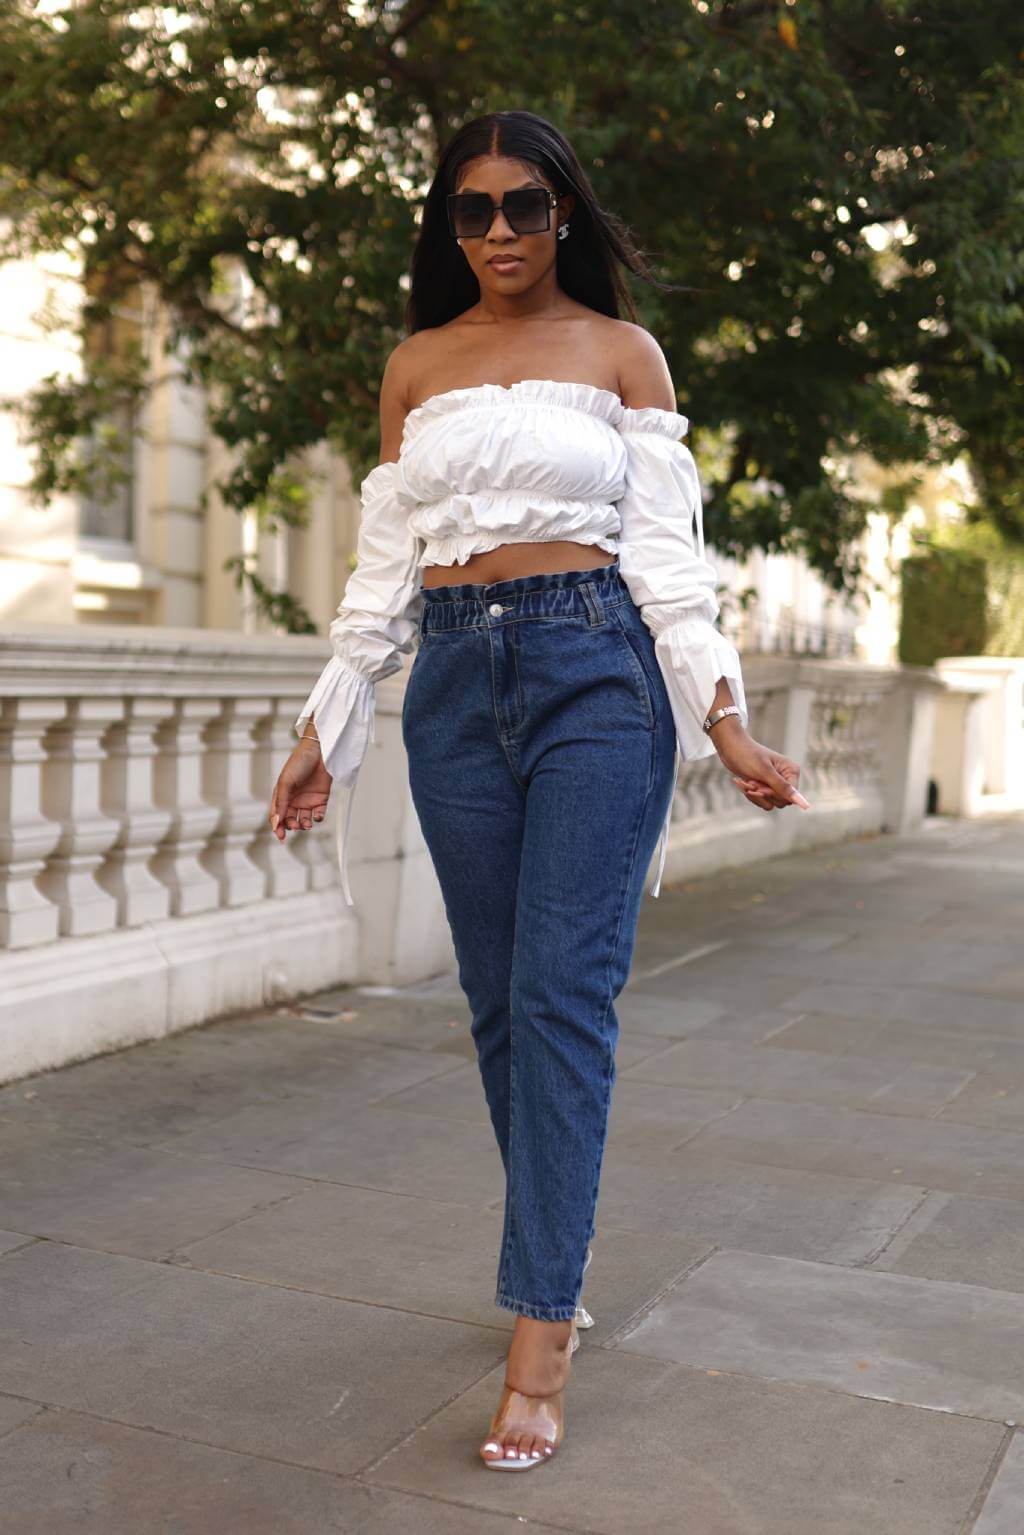 Featuring trendy High Waist Shape Paperbag Jeans. Our top quality denim gives you shape and the gathered elastic waist snatches your waist together. It's more durable to use and better to wash. Plus sizes are available for this style. Give your style a boost with our timeless jeans.